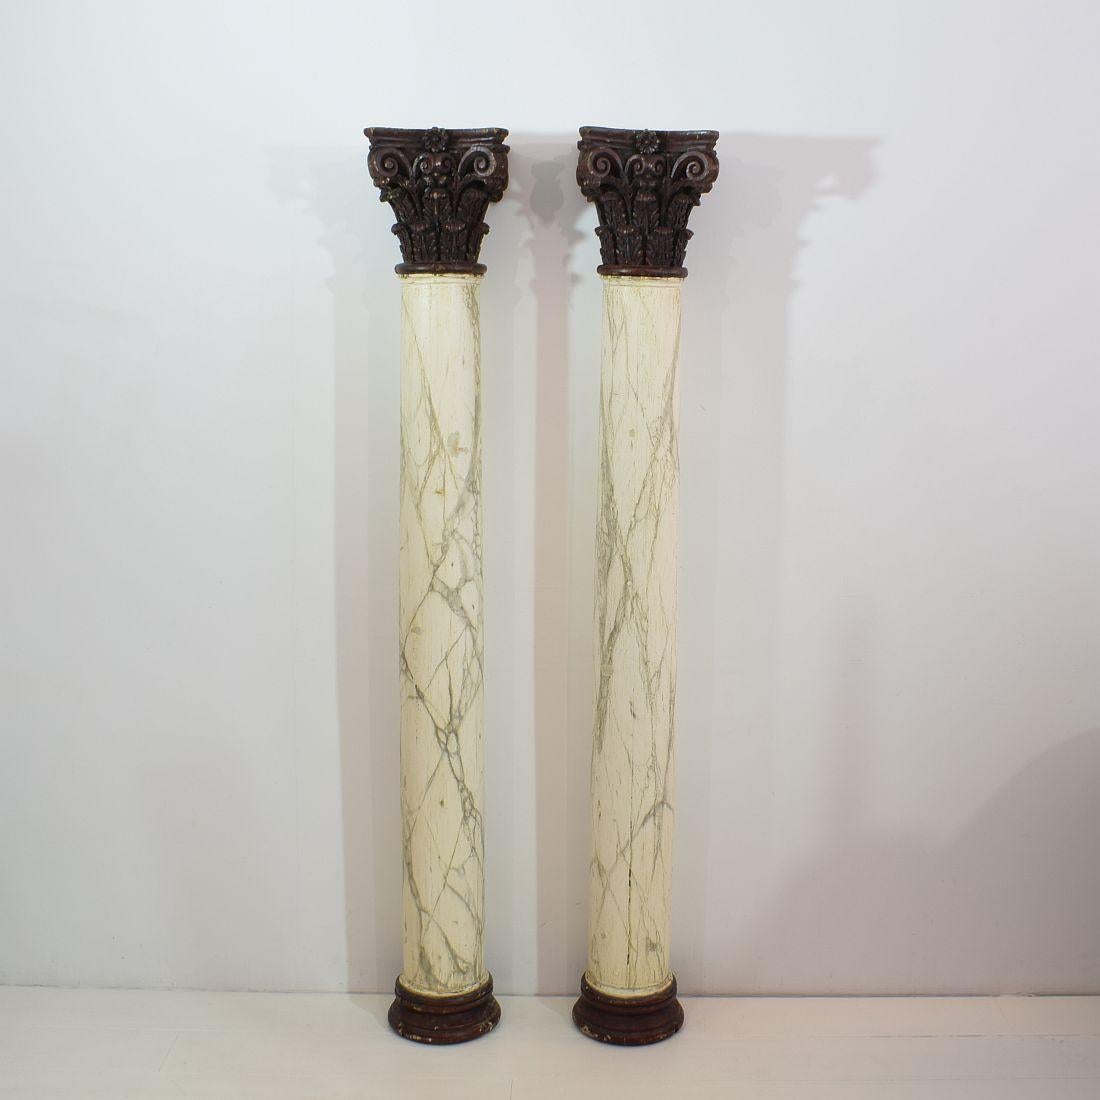 Spectacular pair of late 18th century Corinthian columns with their faux marble paint. Great patina.
Italy, circa 1780. Weathered, small losses.
More pictures available on request.